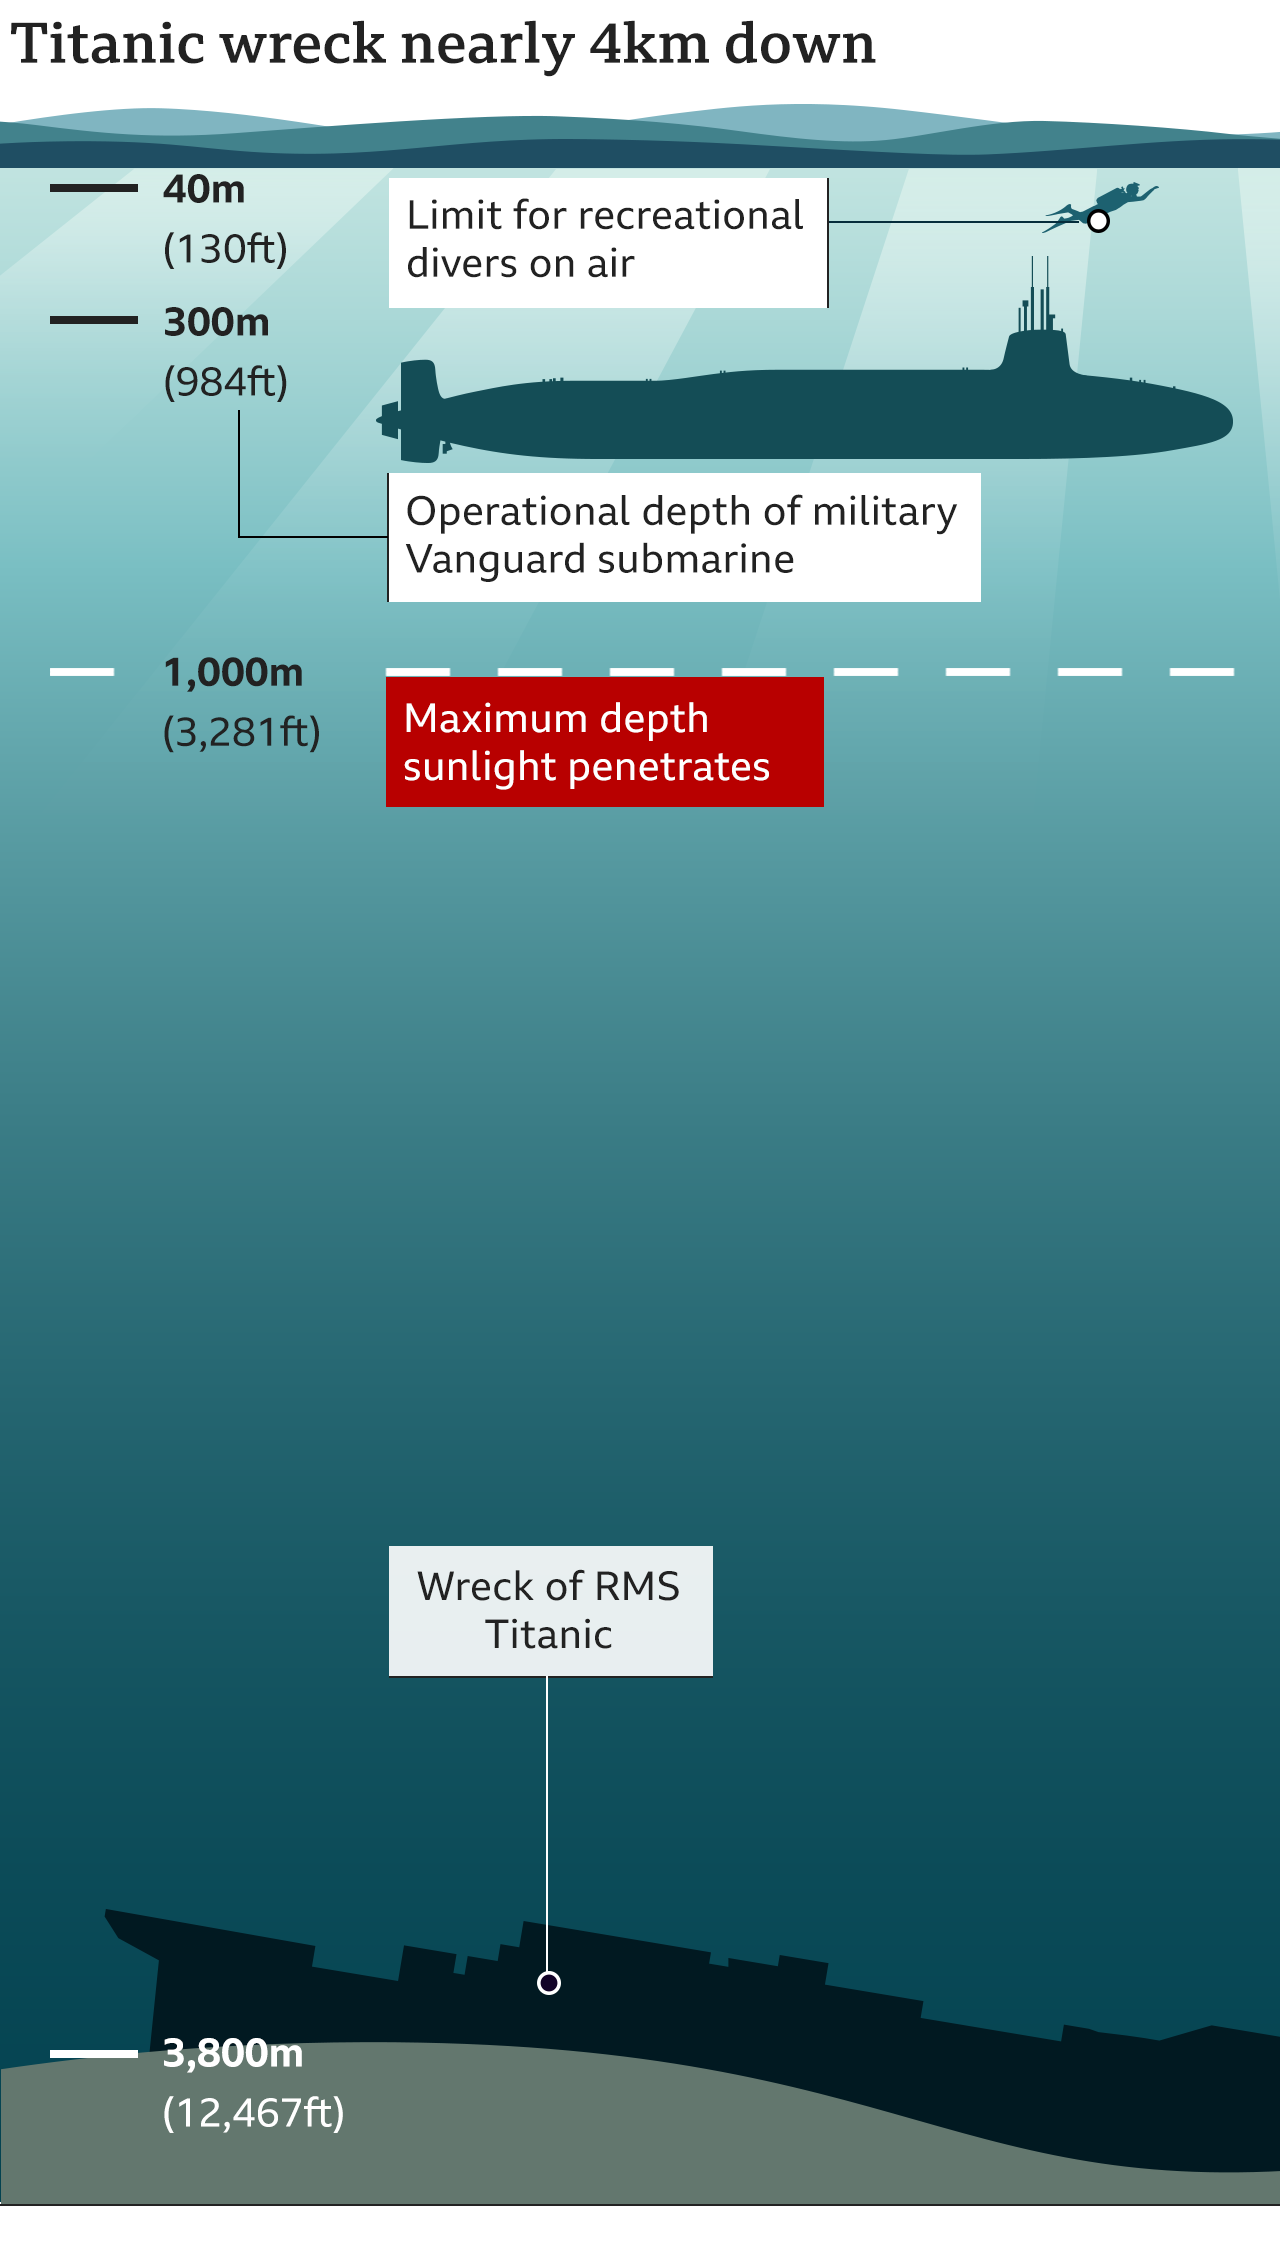 Graphic showing the Titanic wreck is 3,800m below sea level way below the 40m a recreational diver can descend to or even the 300m operational depth of a Vanguard submarine